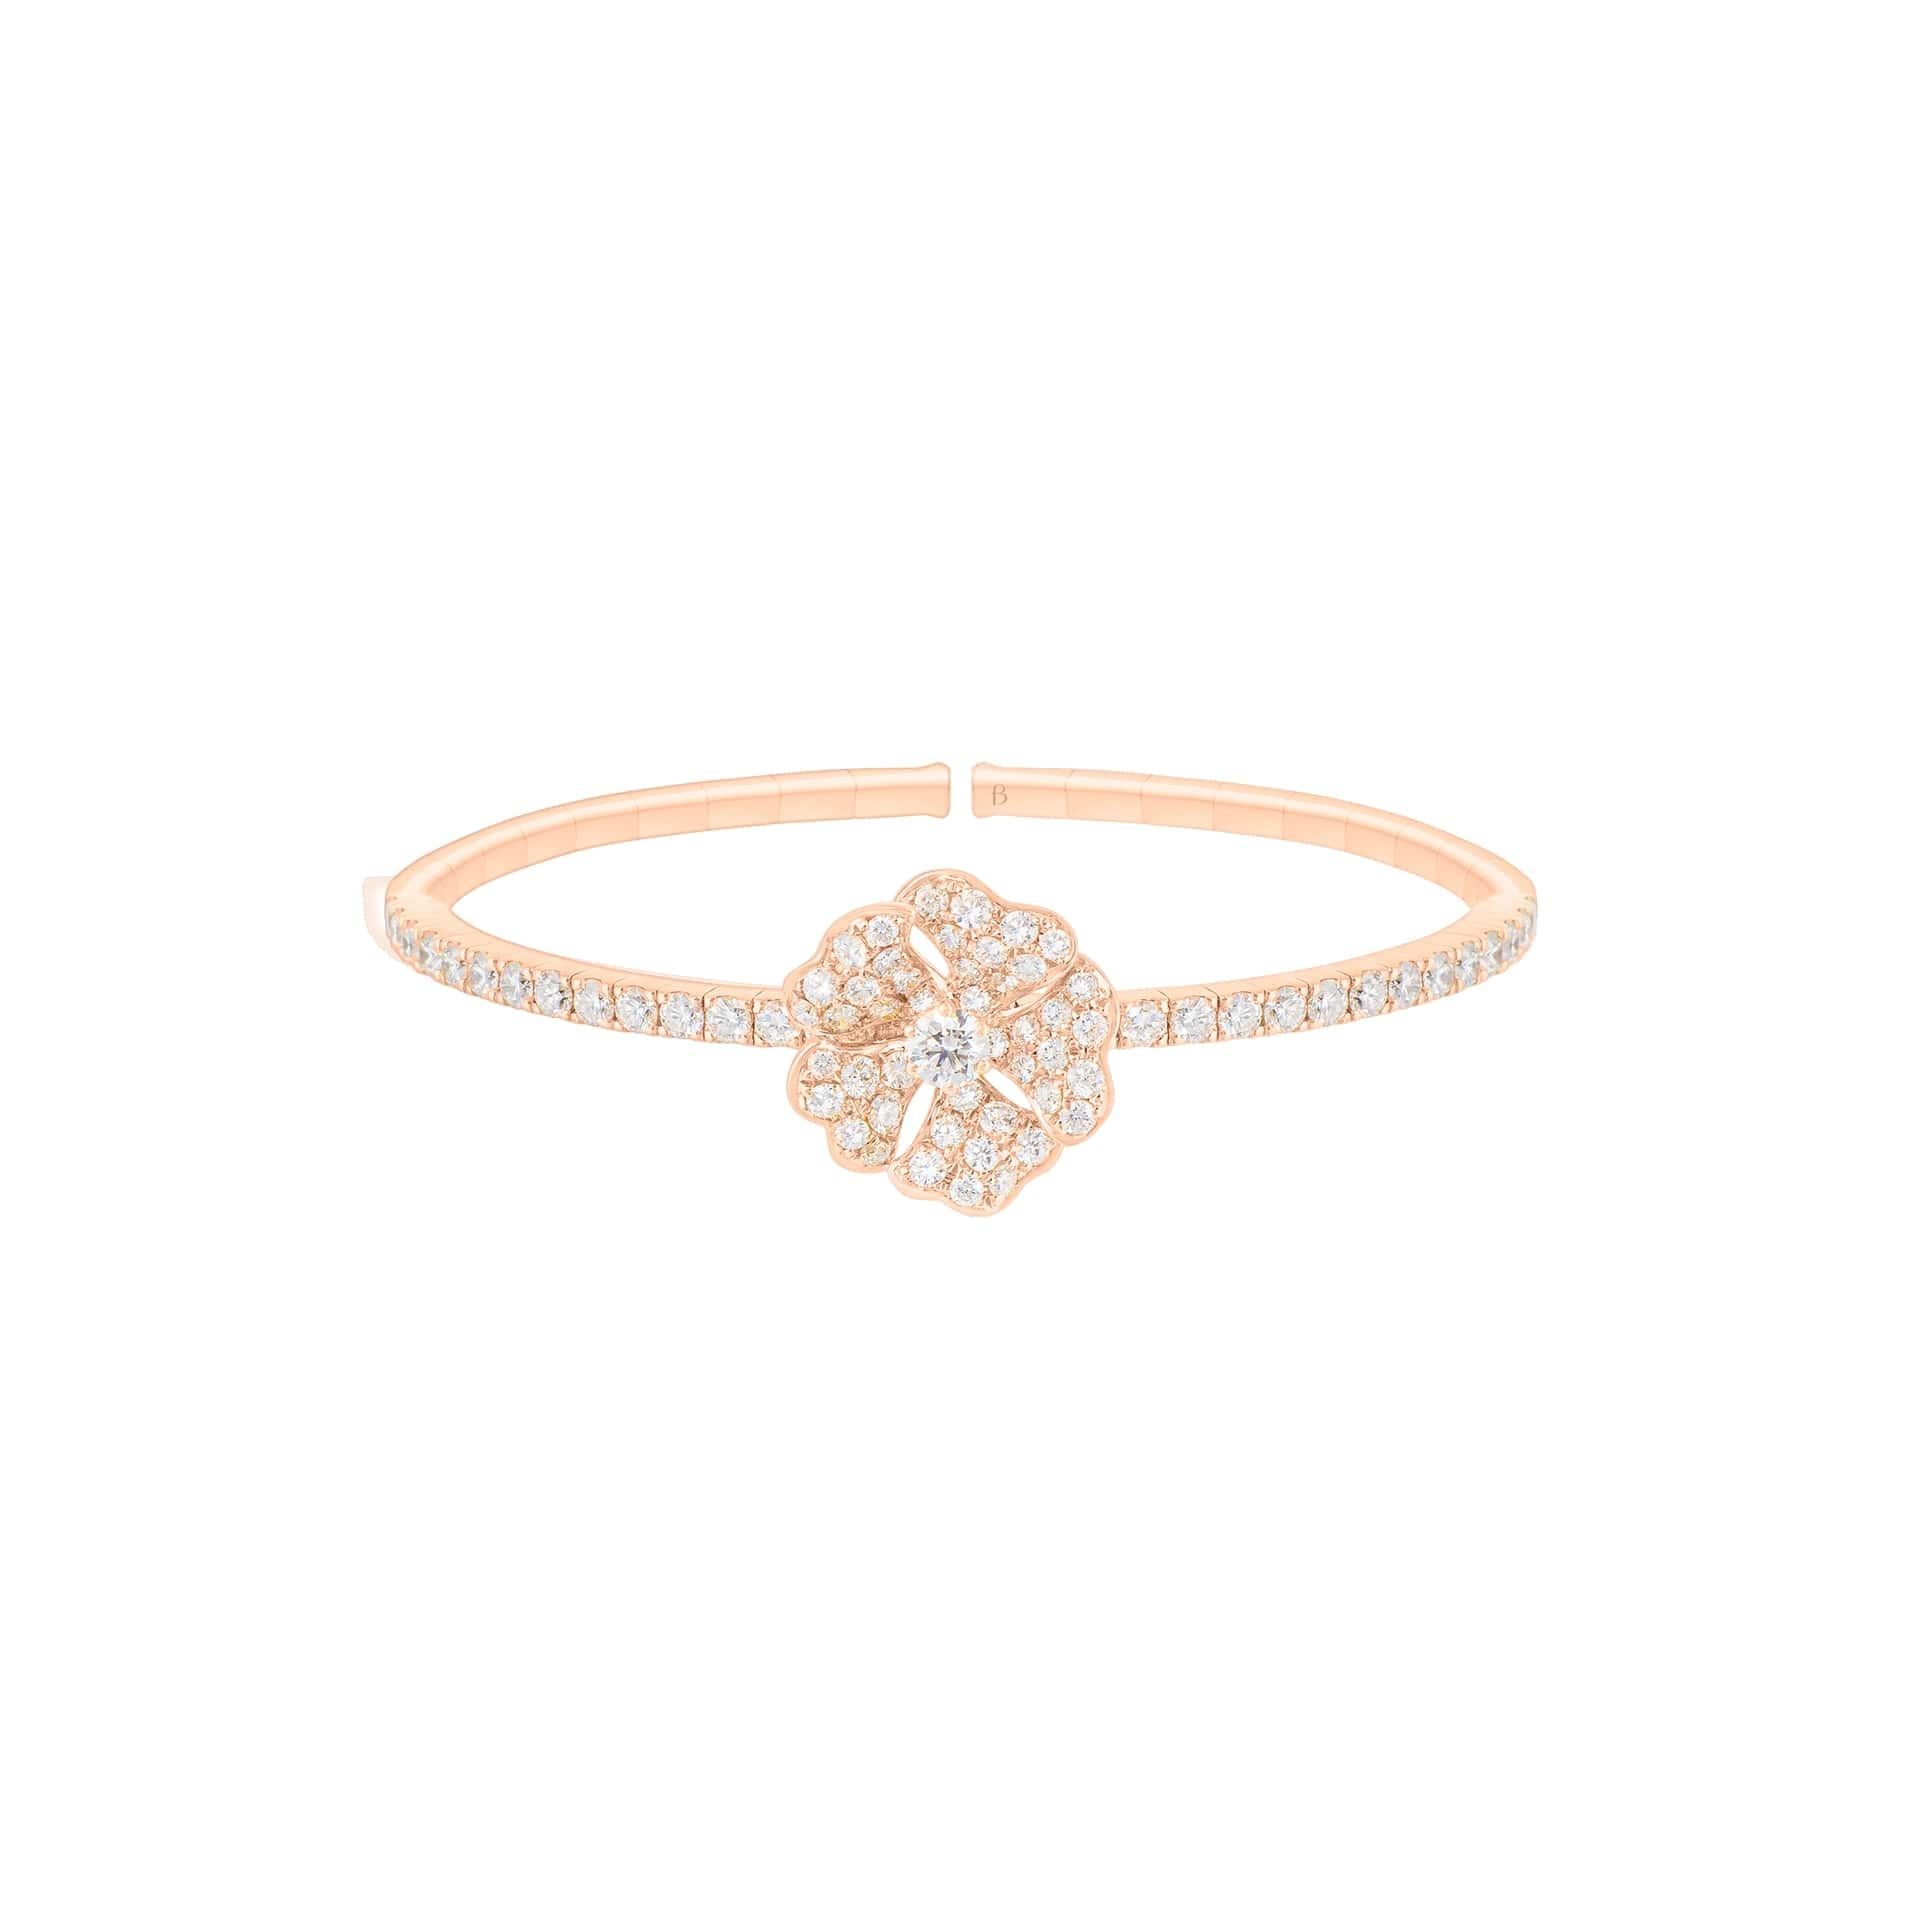 Bloom Diamond Solo Flower Bangle in 18K Rose Gold

Inspired by the exquisite petals of the alpine cinquefoil flower, the Bloom collection combines the richness of diamonds and precious metals with the light versatility of this delicate, five-pointed